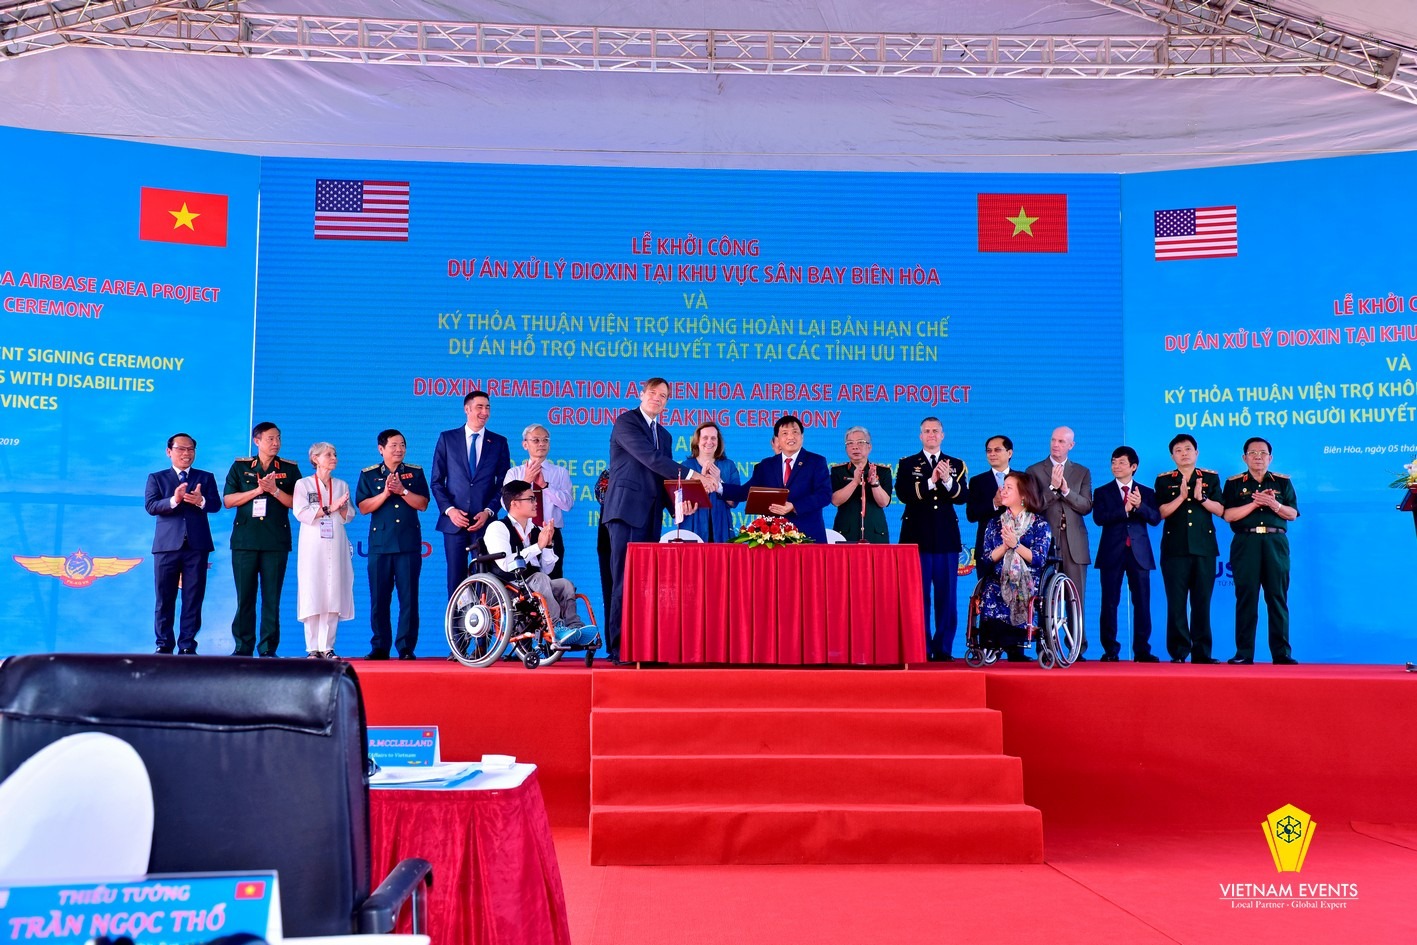 Ground - breaking and signing ceremony on dioxin remediation operations  at Bien Hoa Airbase